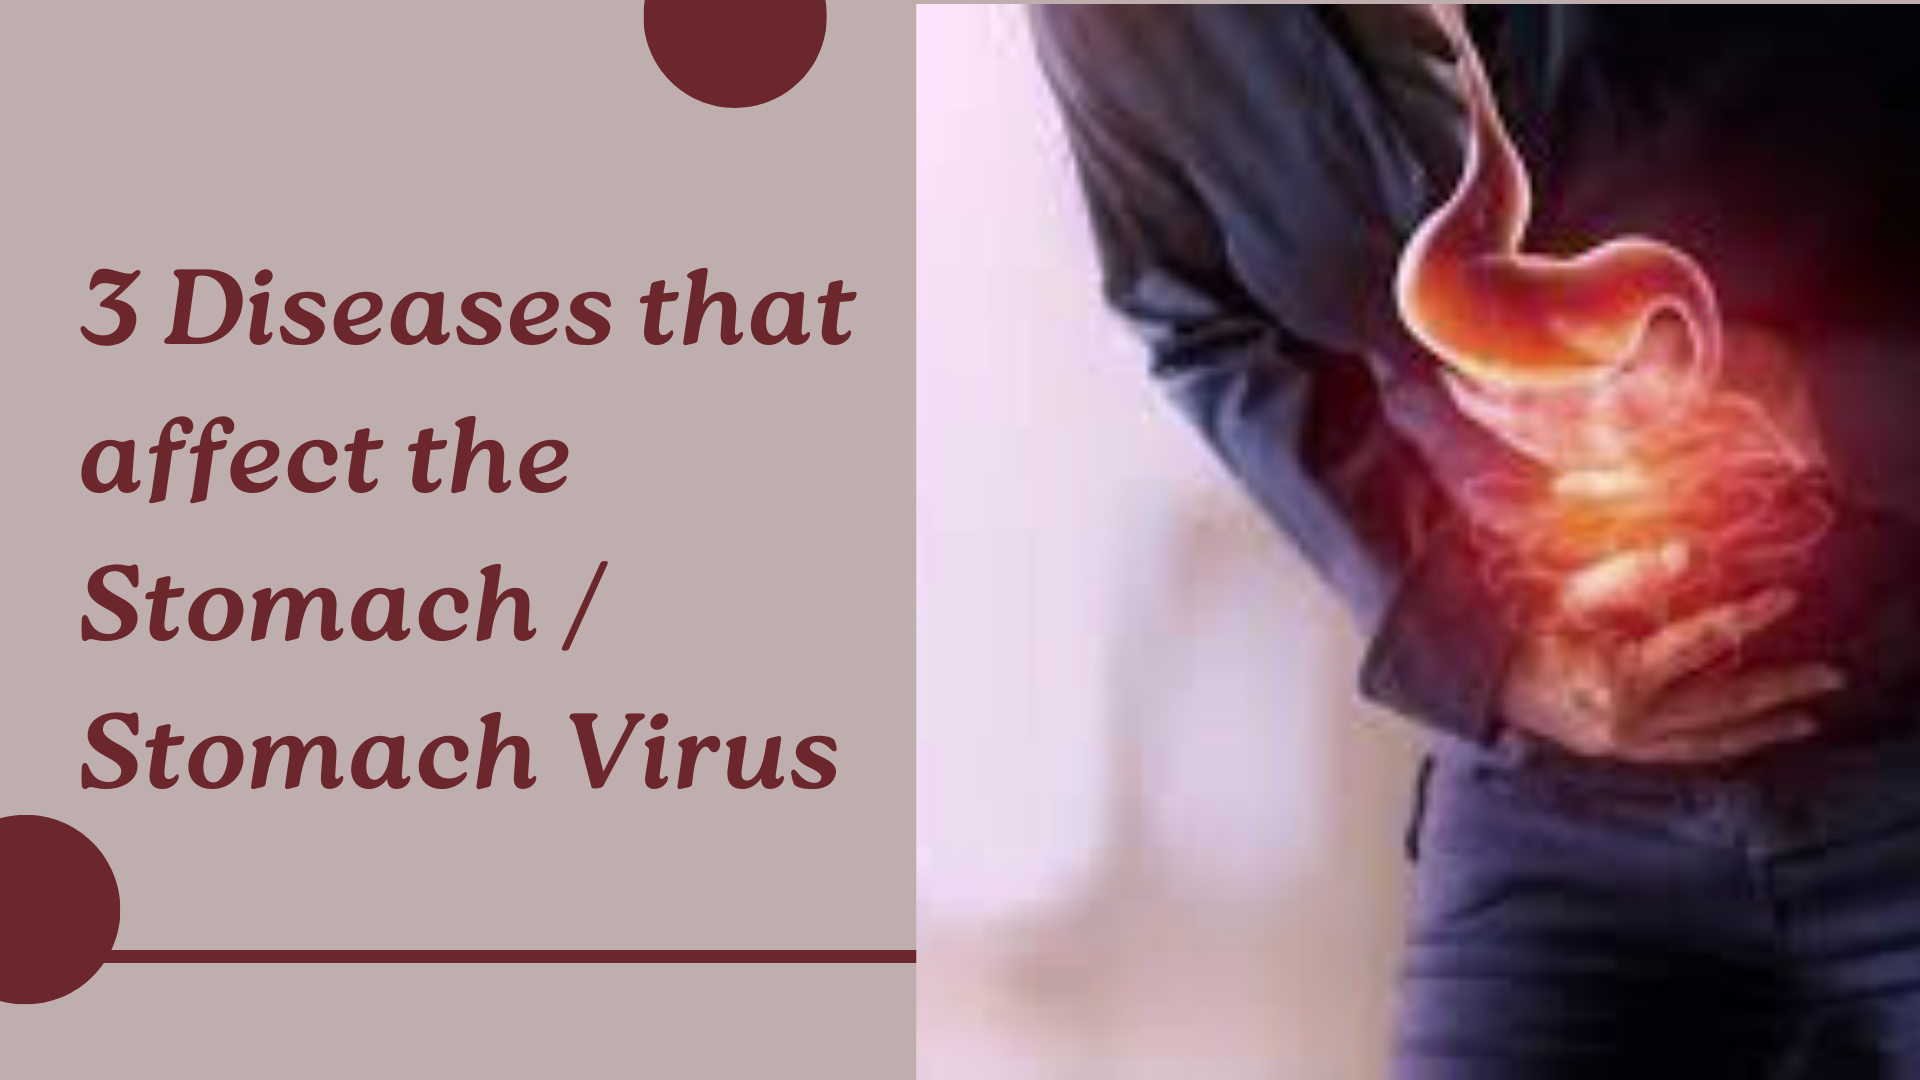 3 Diseases that affect the Stomach / Stomach Virus